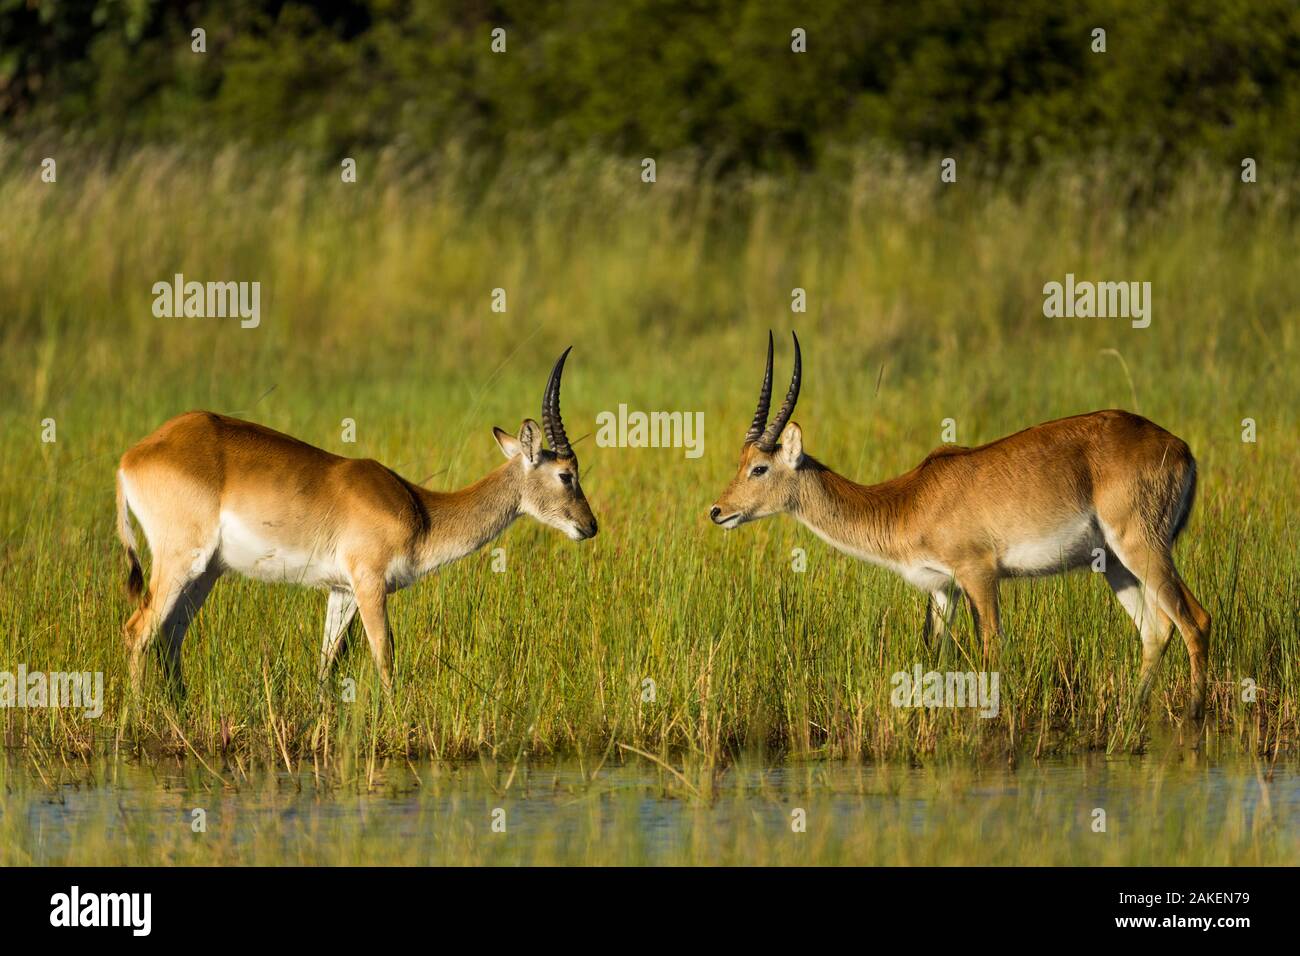 Southern lechwe (Kobus leche), two males about to fight, facing each other. Okavango Delta, Botswana. Stock Photo